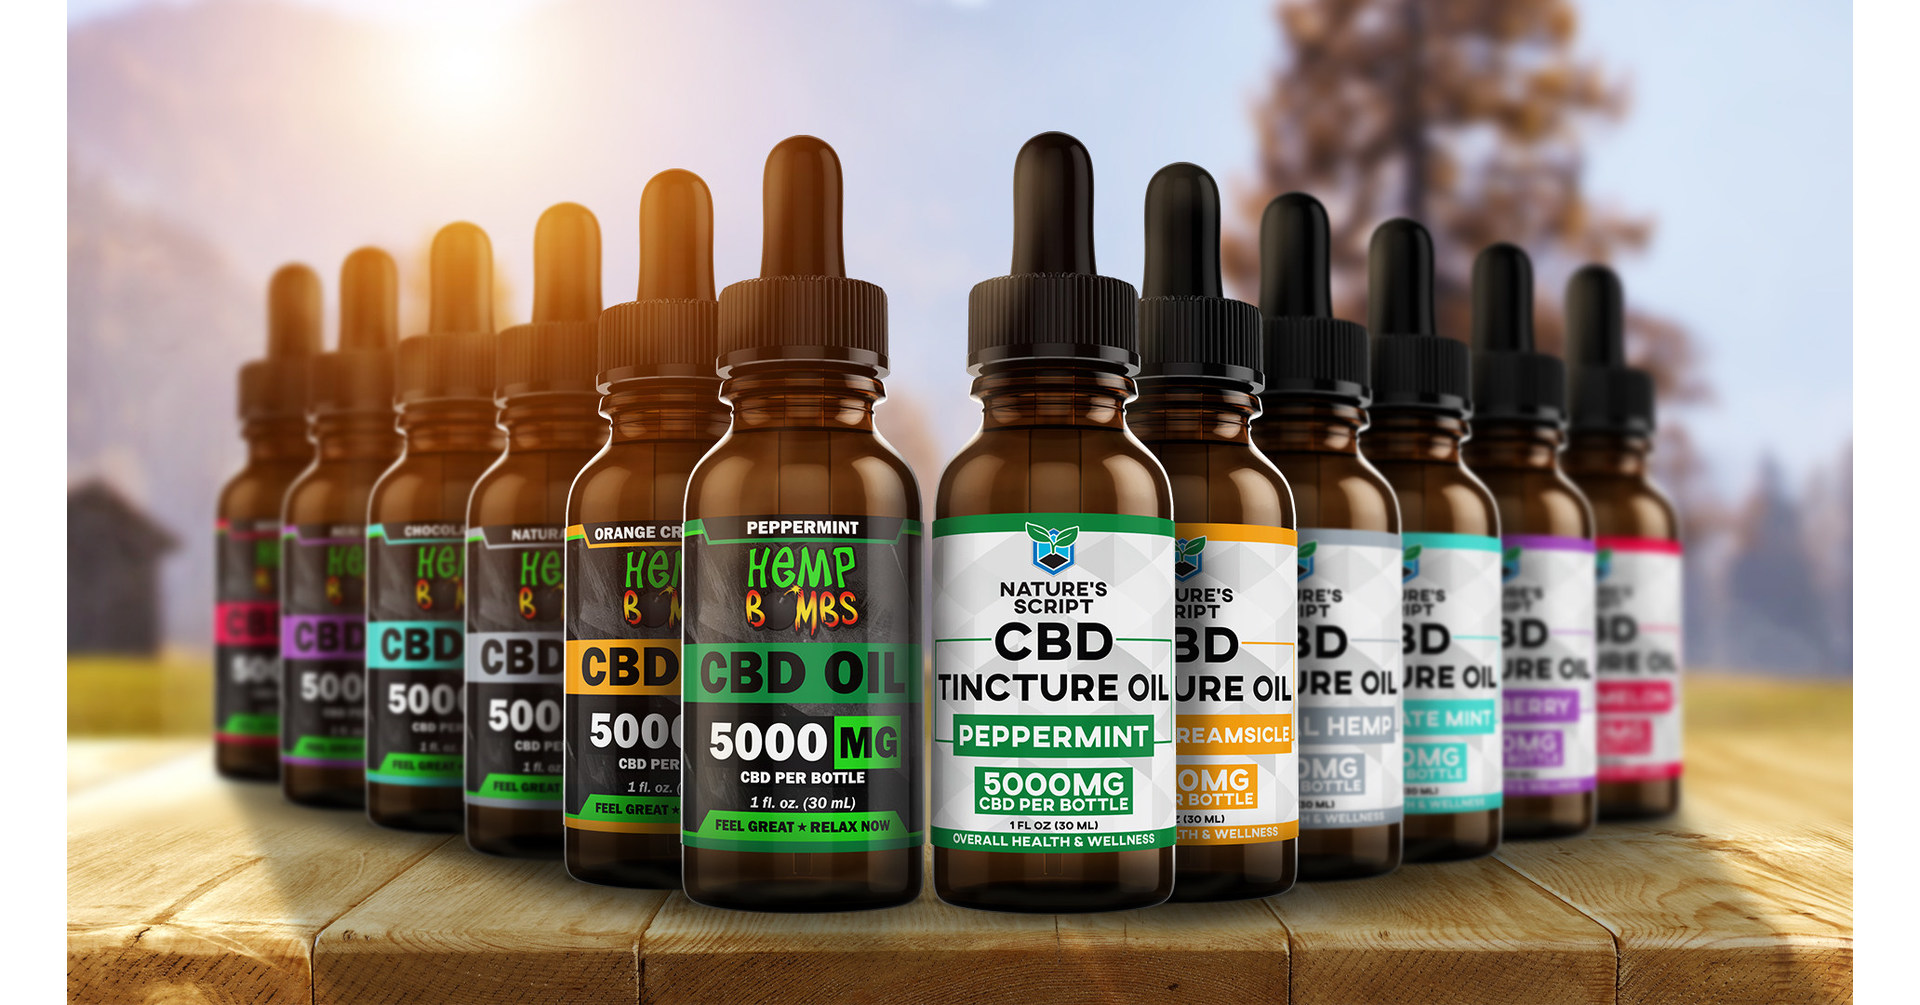 More is Better: Hemp Nature's Script Revolutionize CBD Oil by Increasing Milligrams of CBD Without Increasing Price